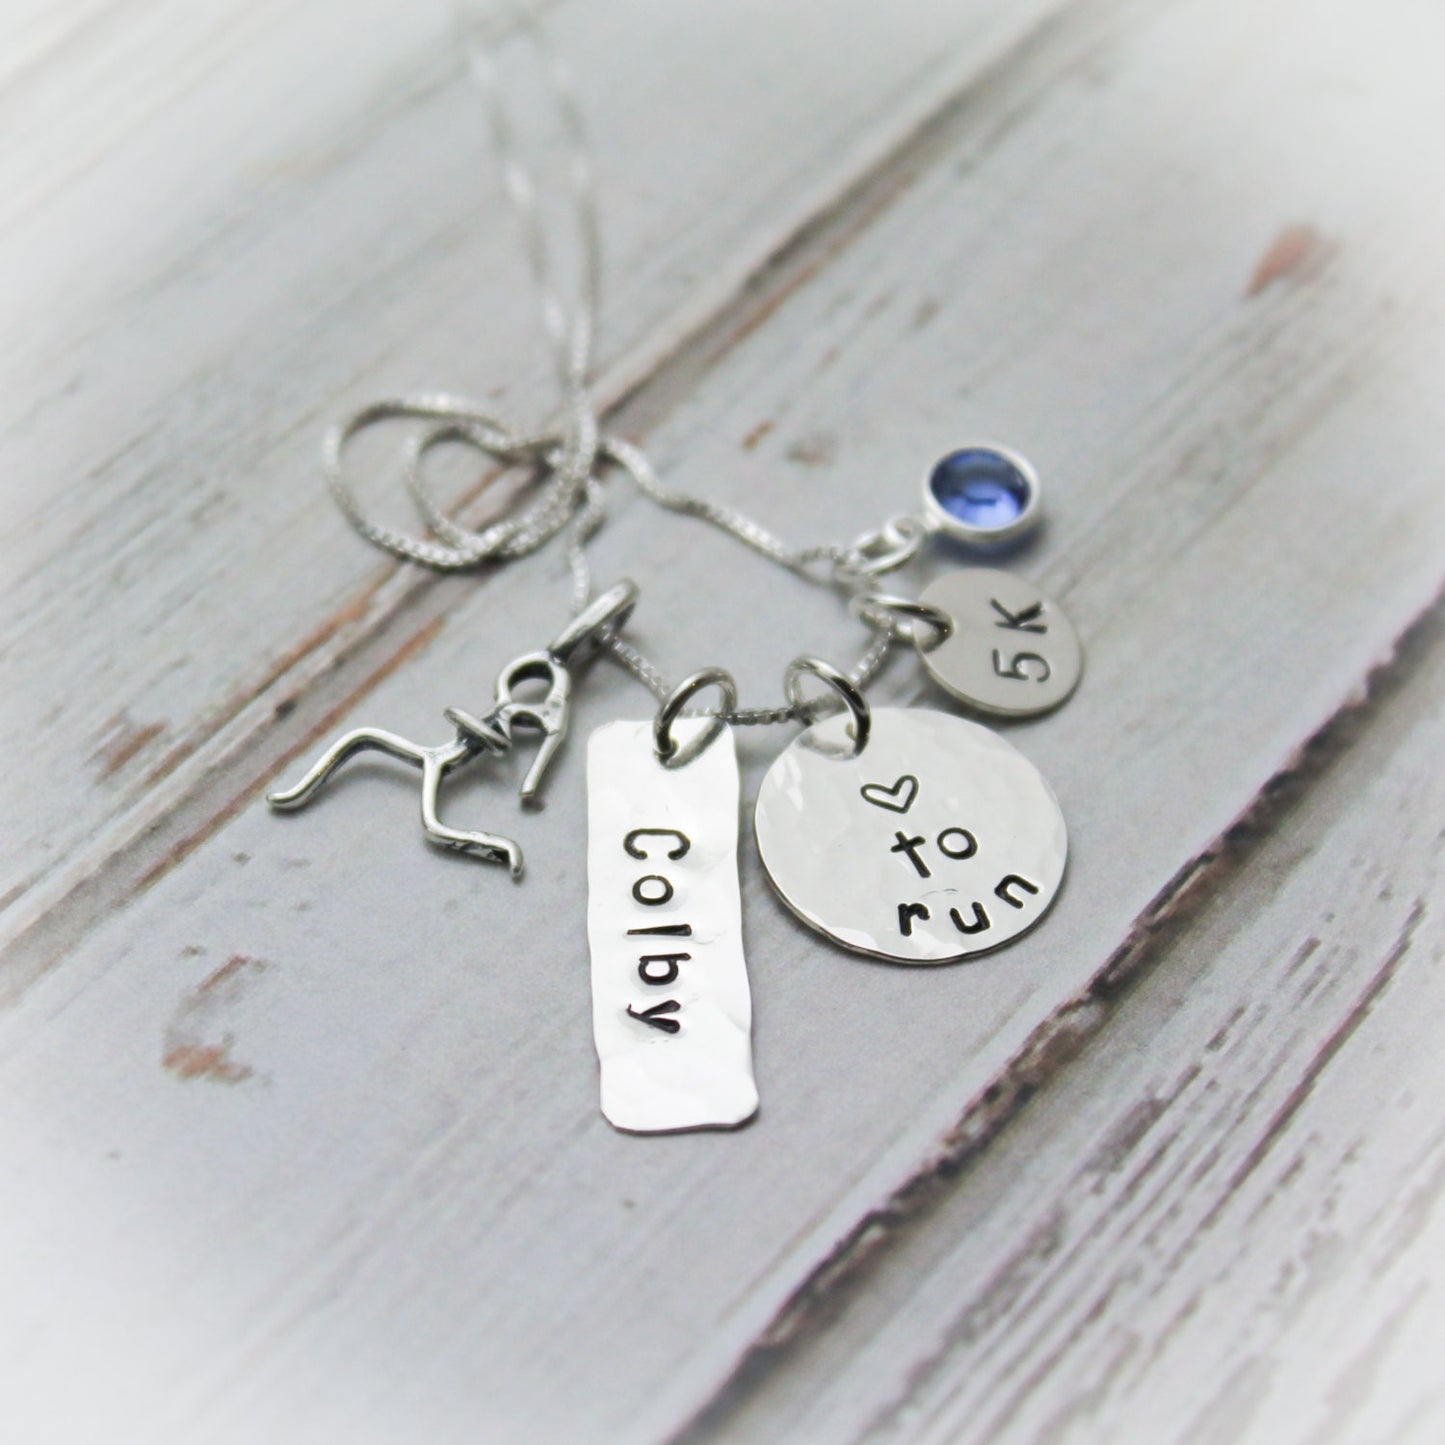 Personalized Love to Run Necklace, Marathon Necklace, Runner Necklace, Running Necklace, Marathon Gift, Runner Gift, Hand Stamped Necklace